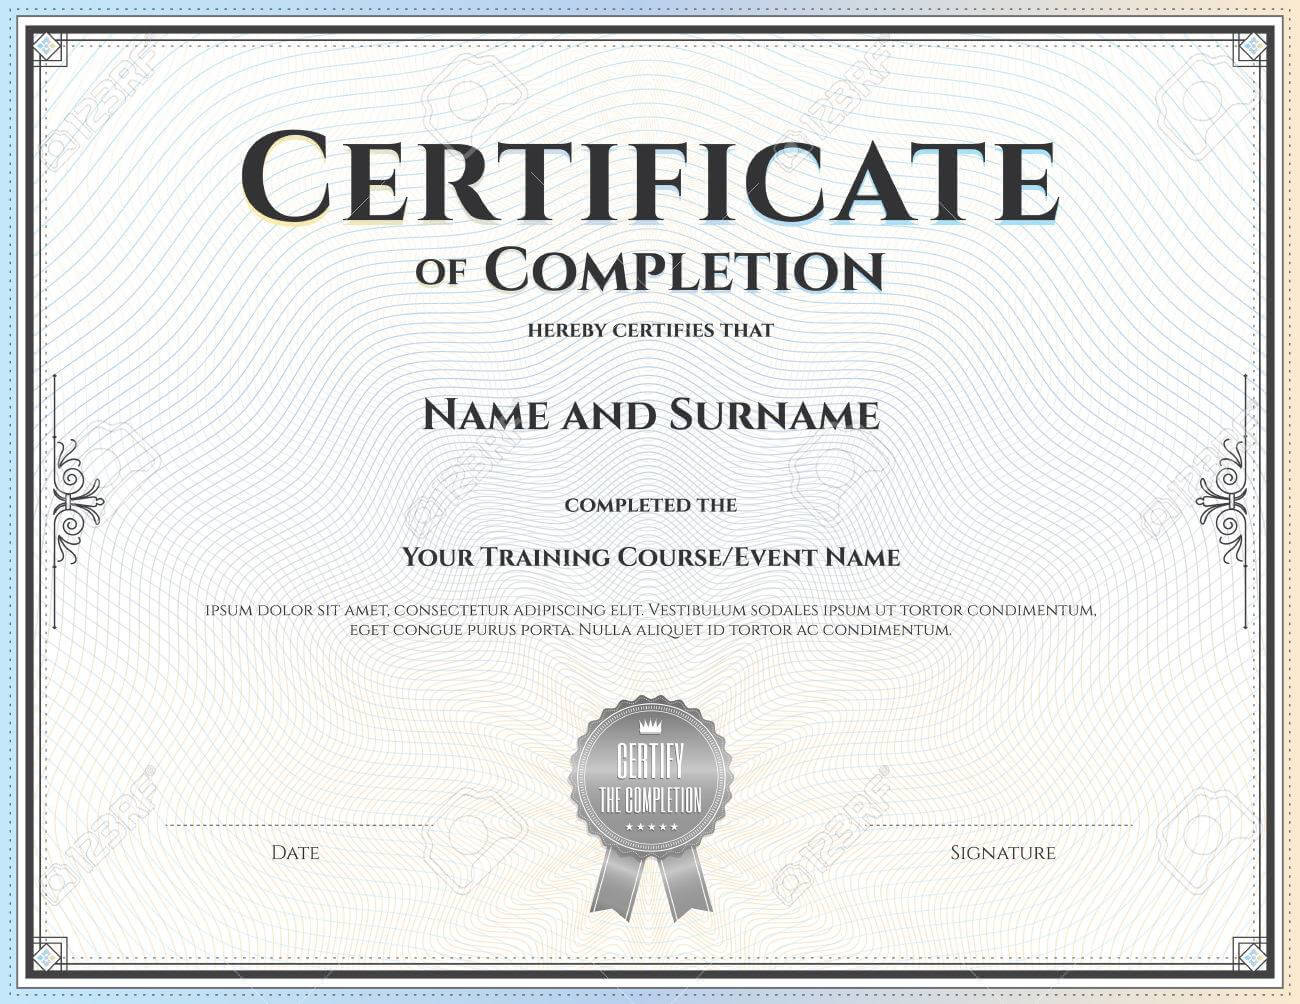 012 Template Ideas Certification Of Completion Certificate Inside Construction Certificate Of Completion Template